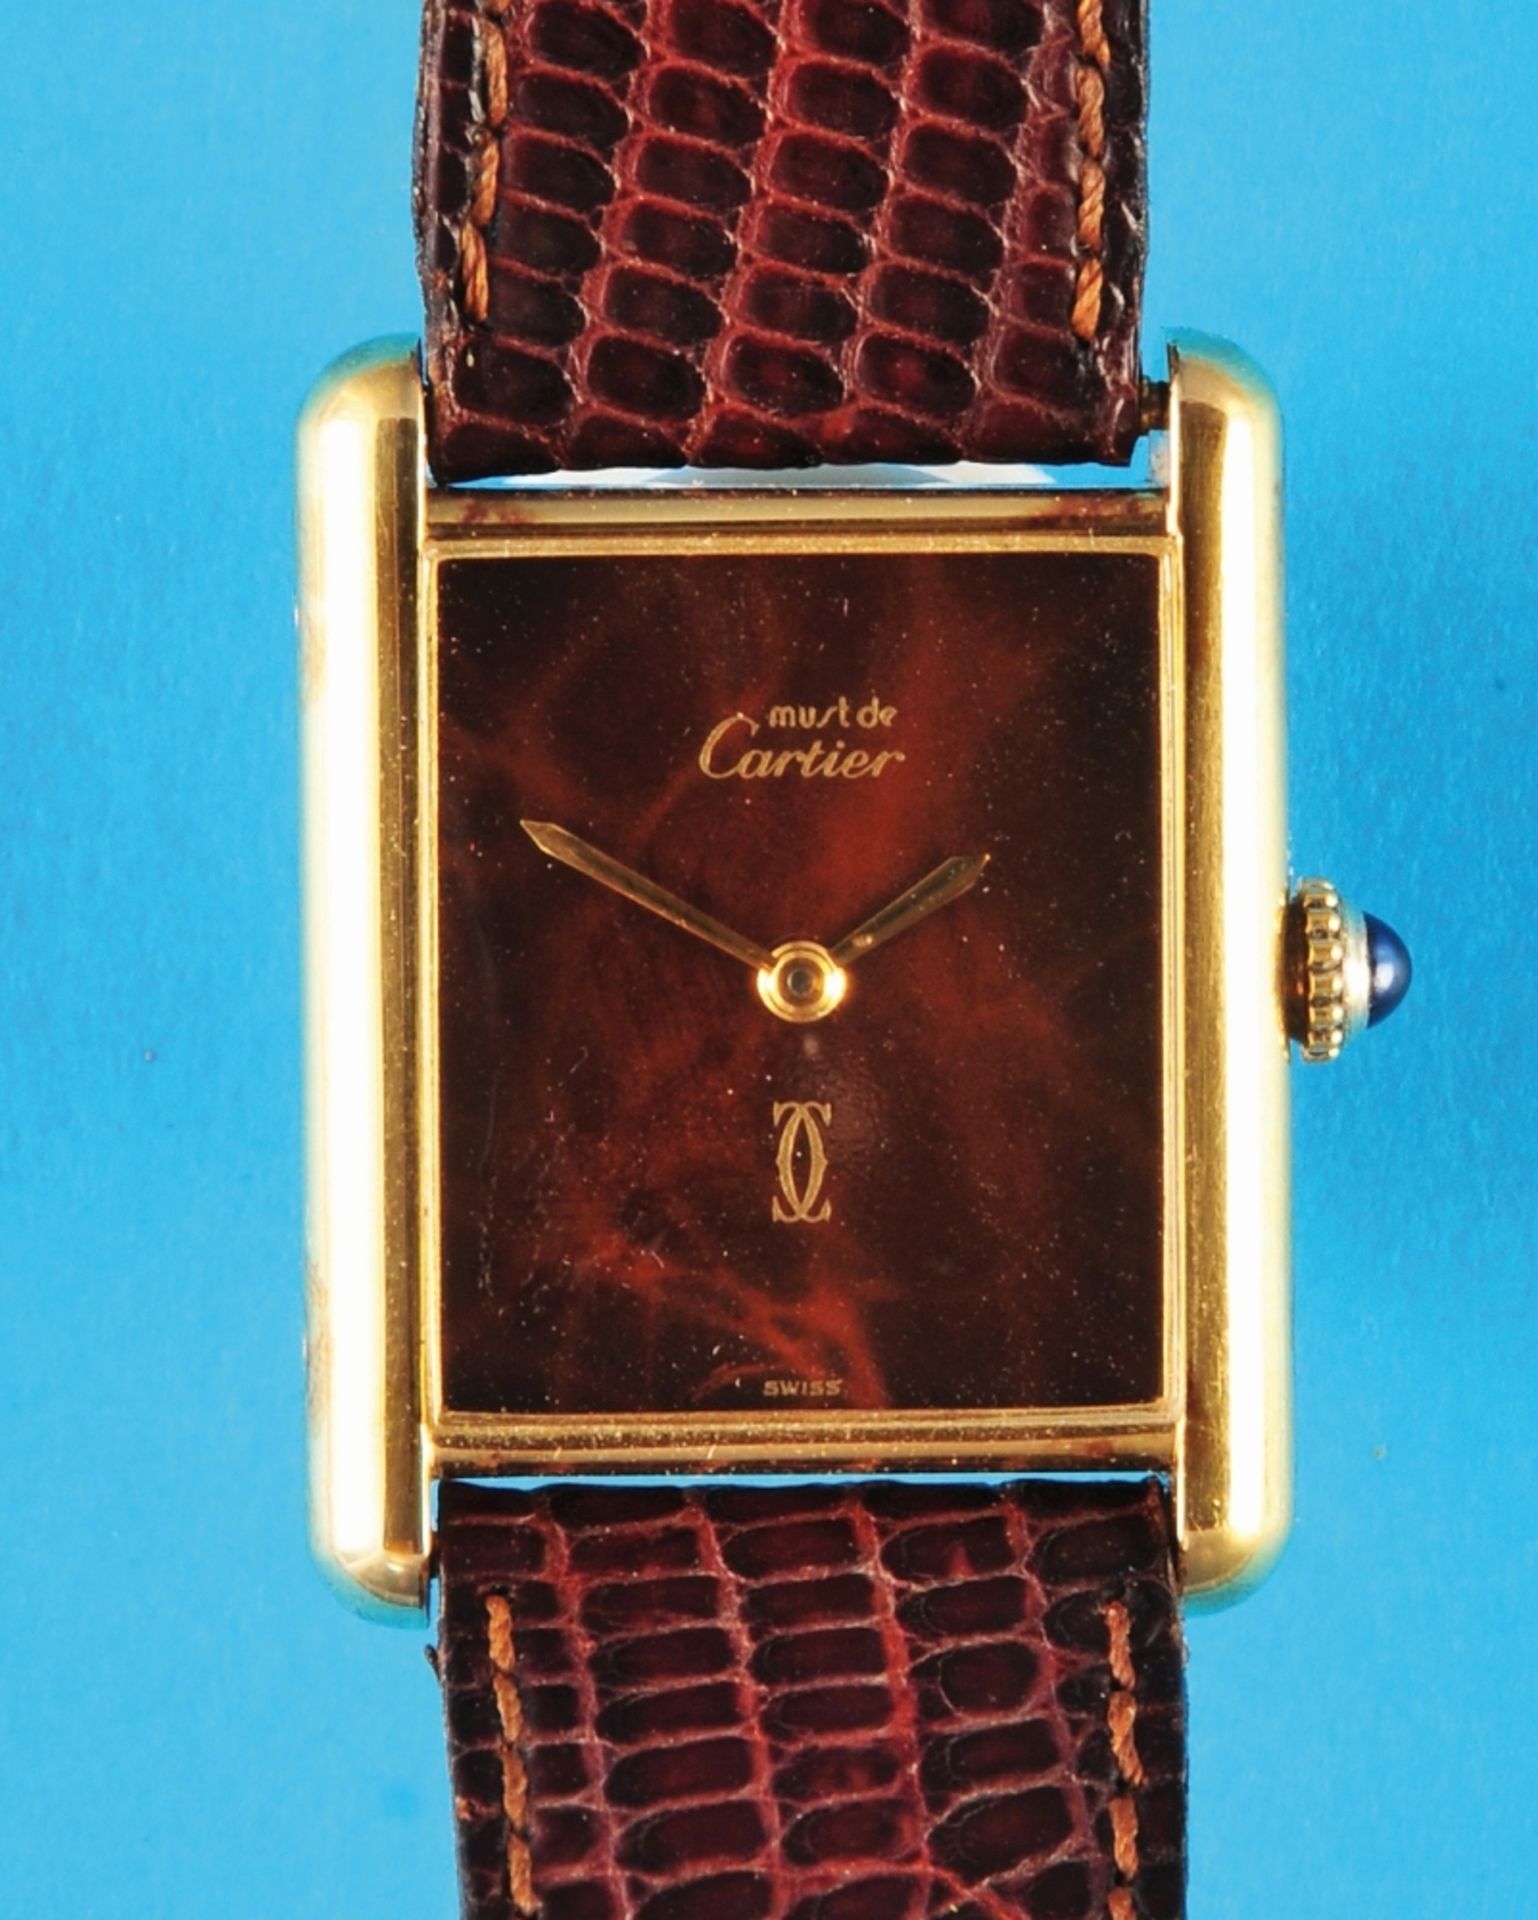 Cartier Tank, ladies' tortoiseshell dial wristwatch, 20 micron gold-plated sterling silver case